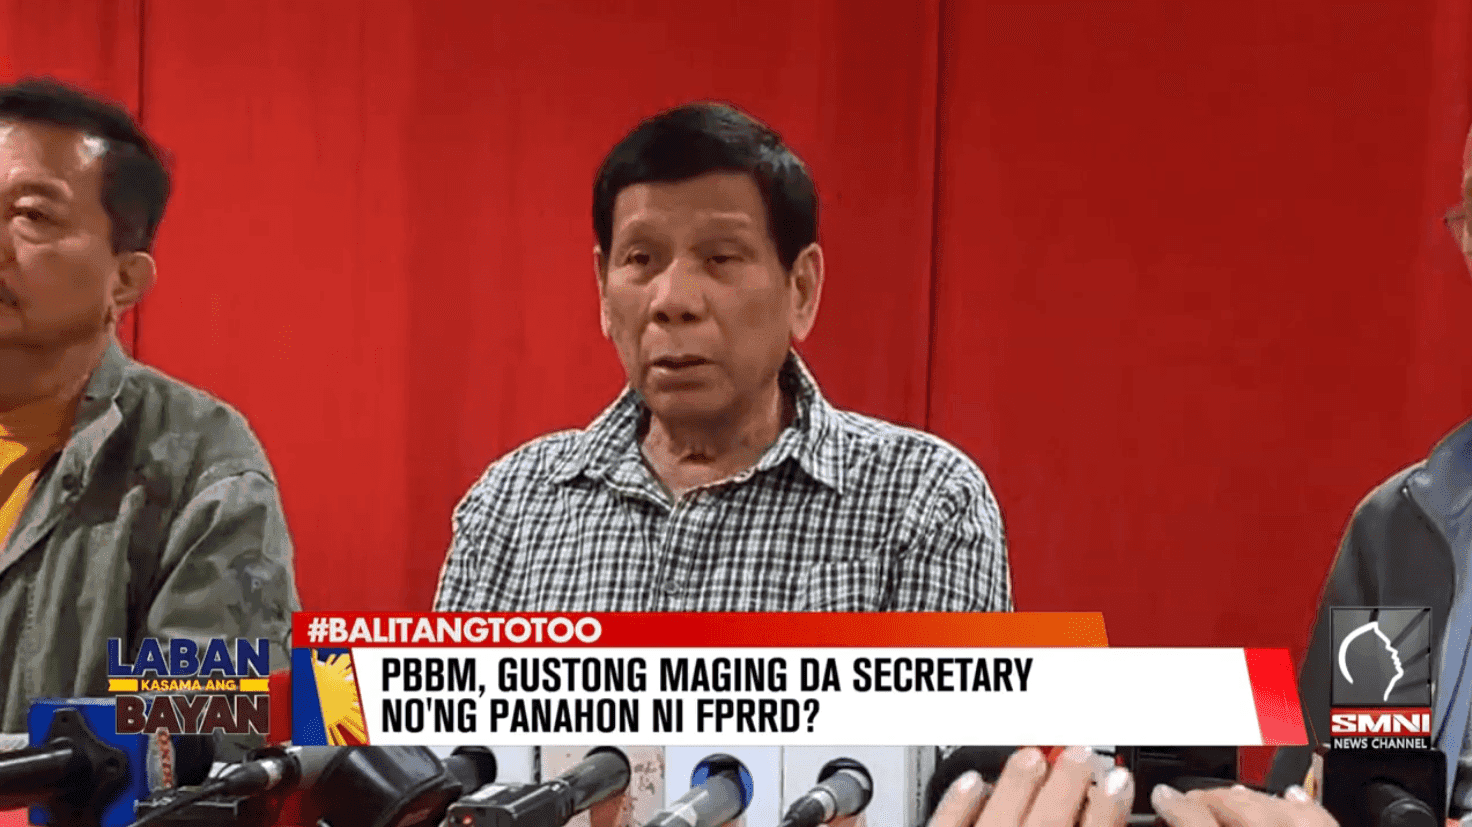 Ex-Pres. Duterte says he used fentanyl for medication